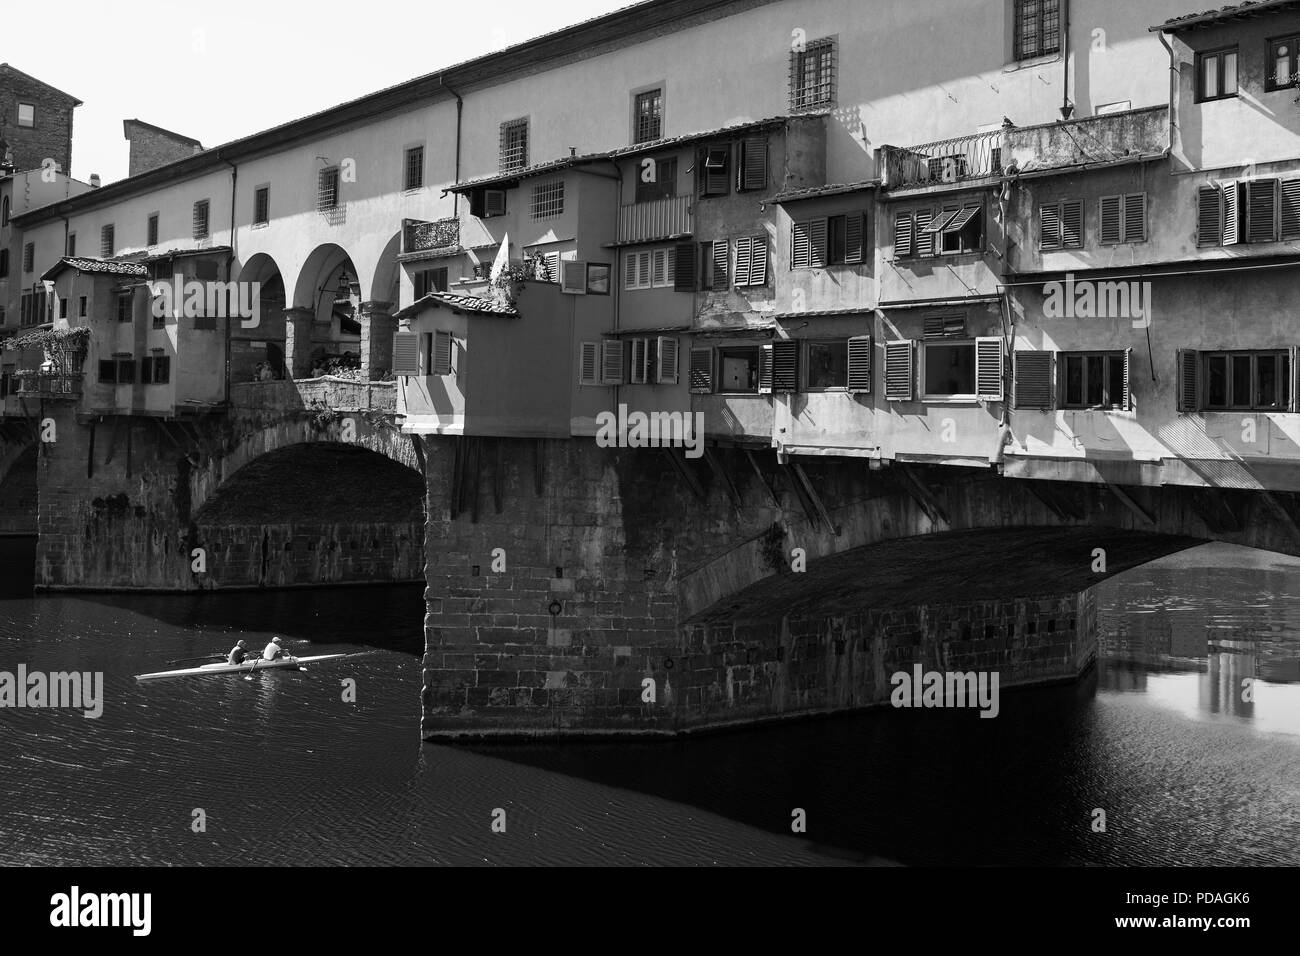 Close-up of the Ponte Vecchio spanning the River Arno in Florence Tuscany, Italy, with a double scull shooting the bridge.  Black and white version Stock Photo